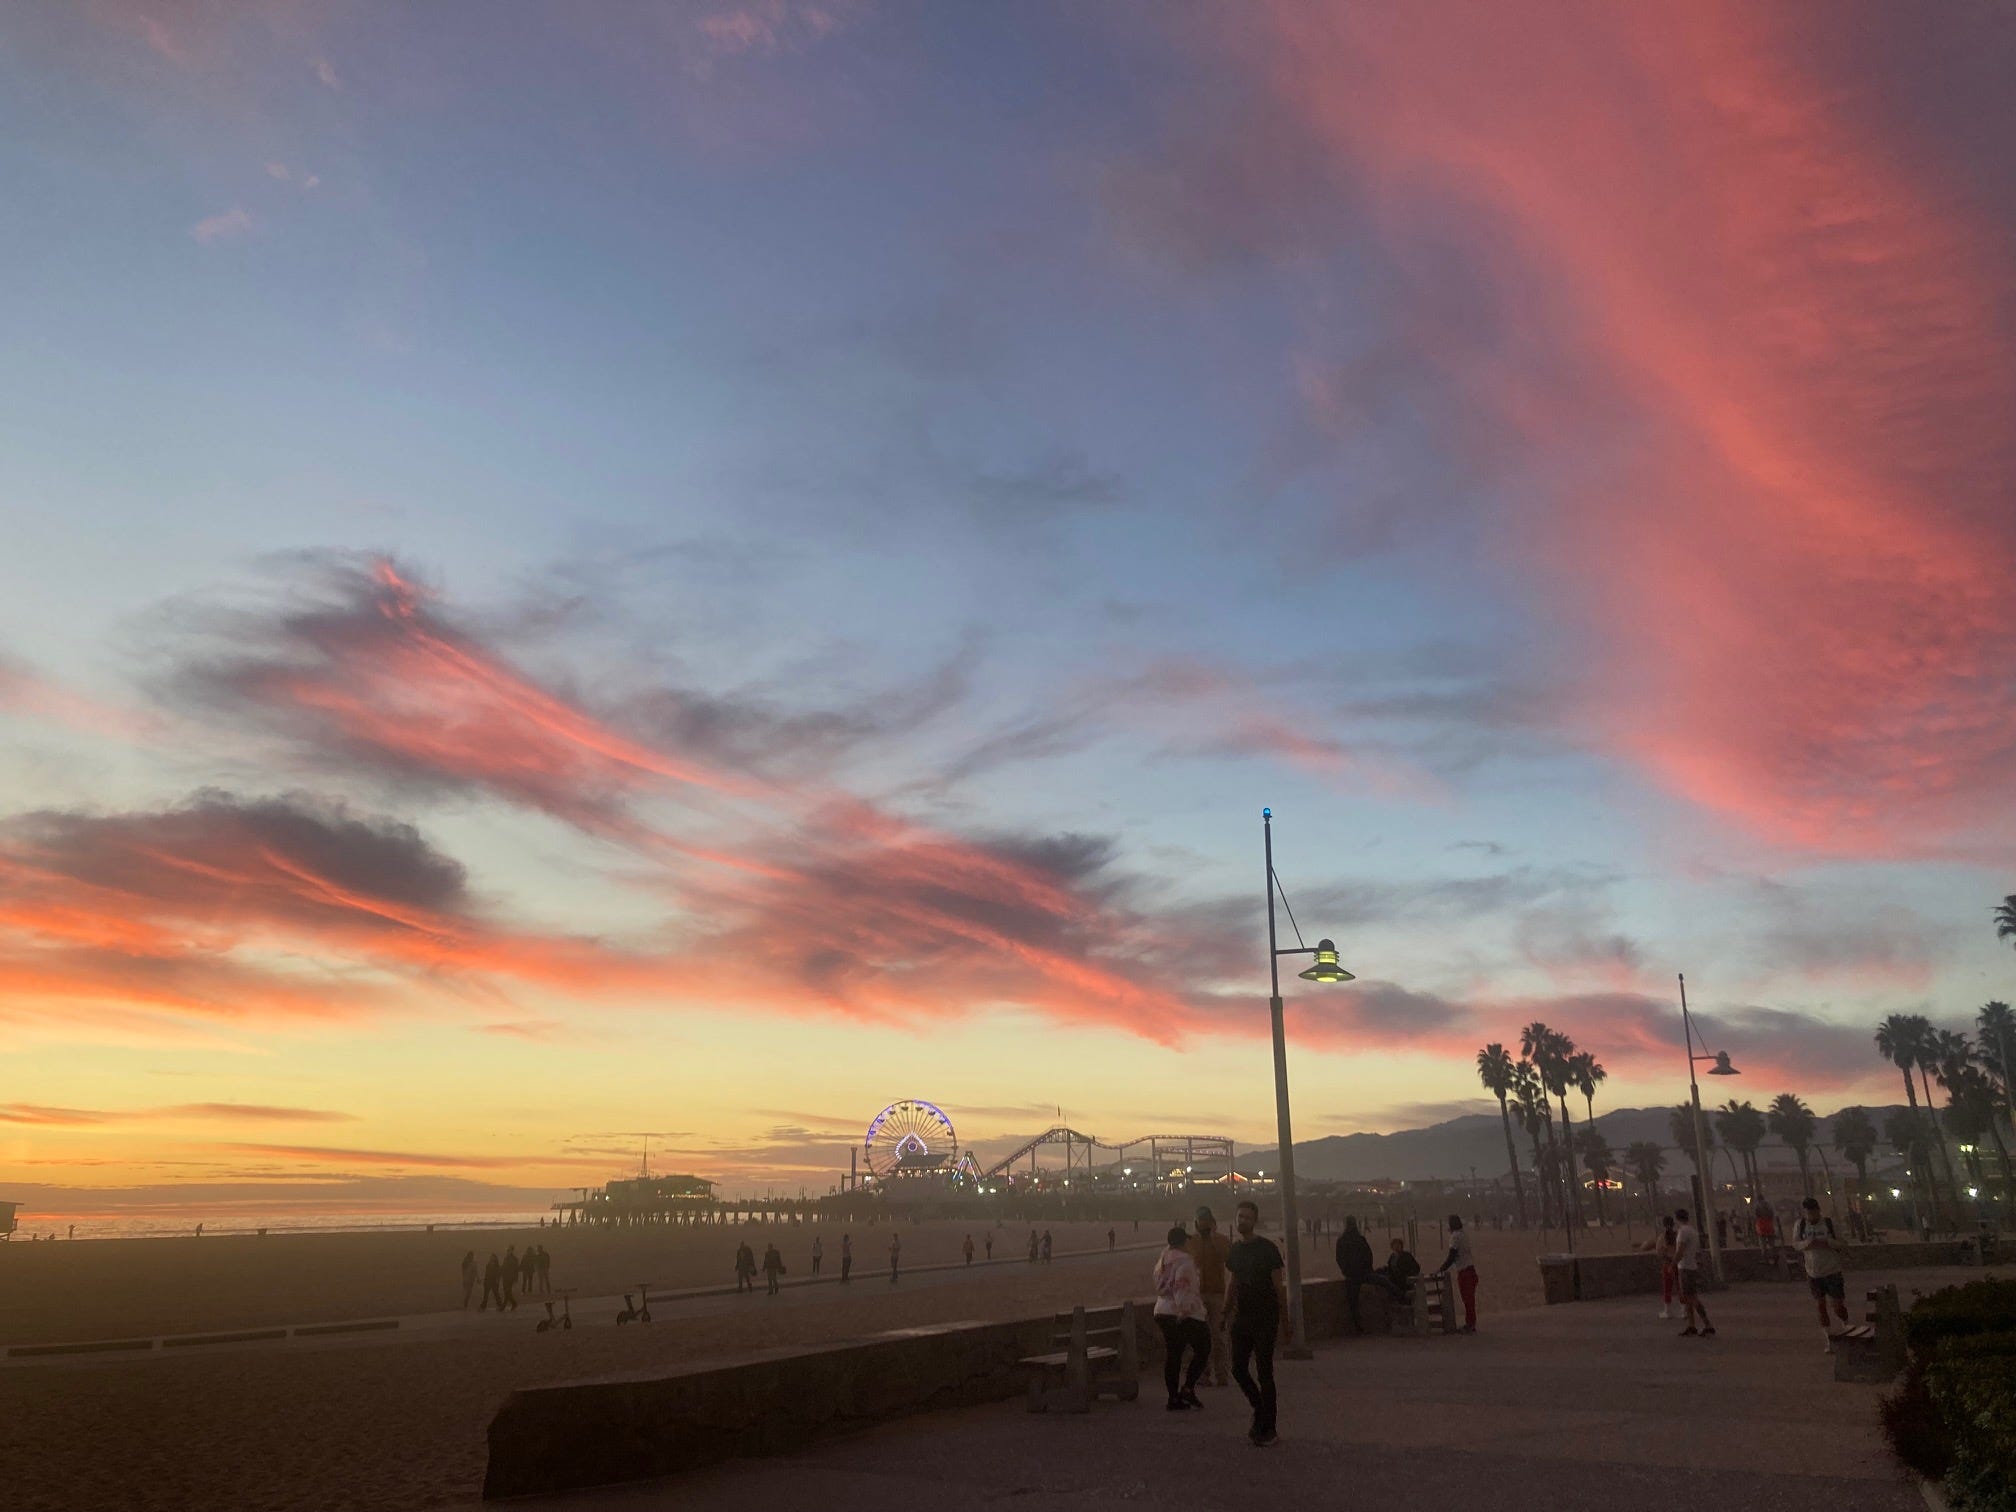 A sunset sky above the beach and the famous pier at Santa Monica, California.